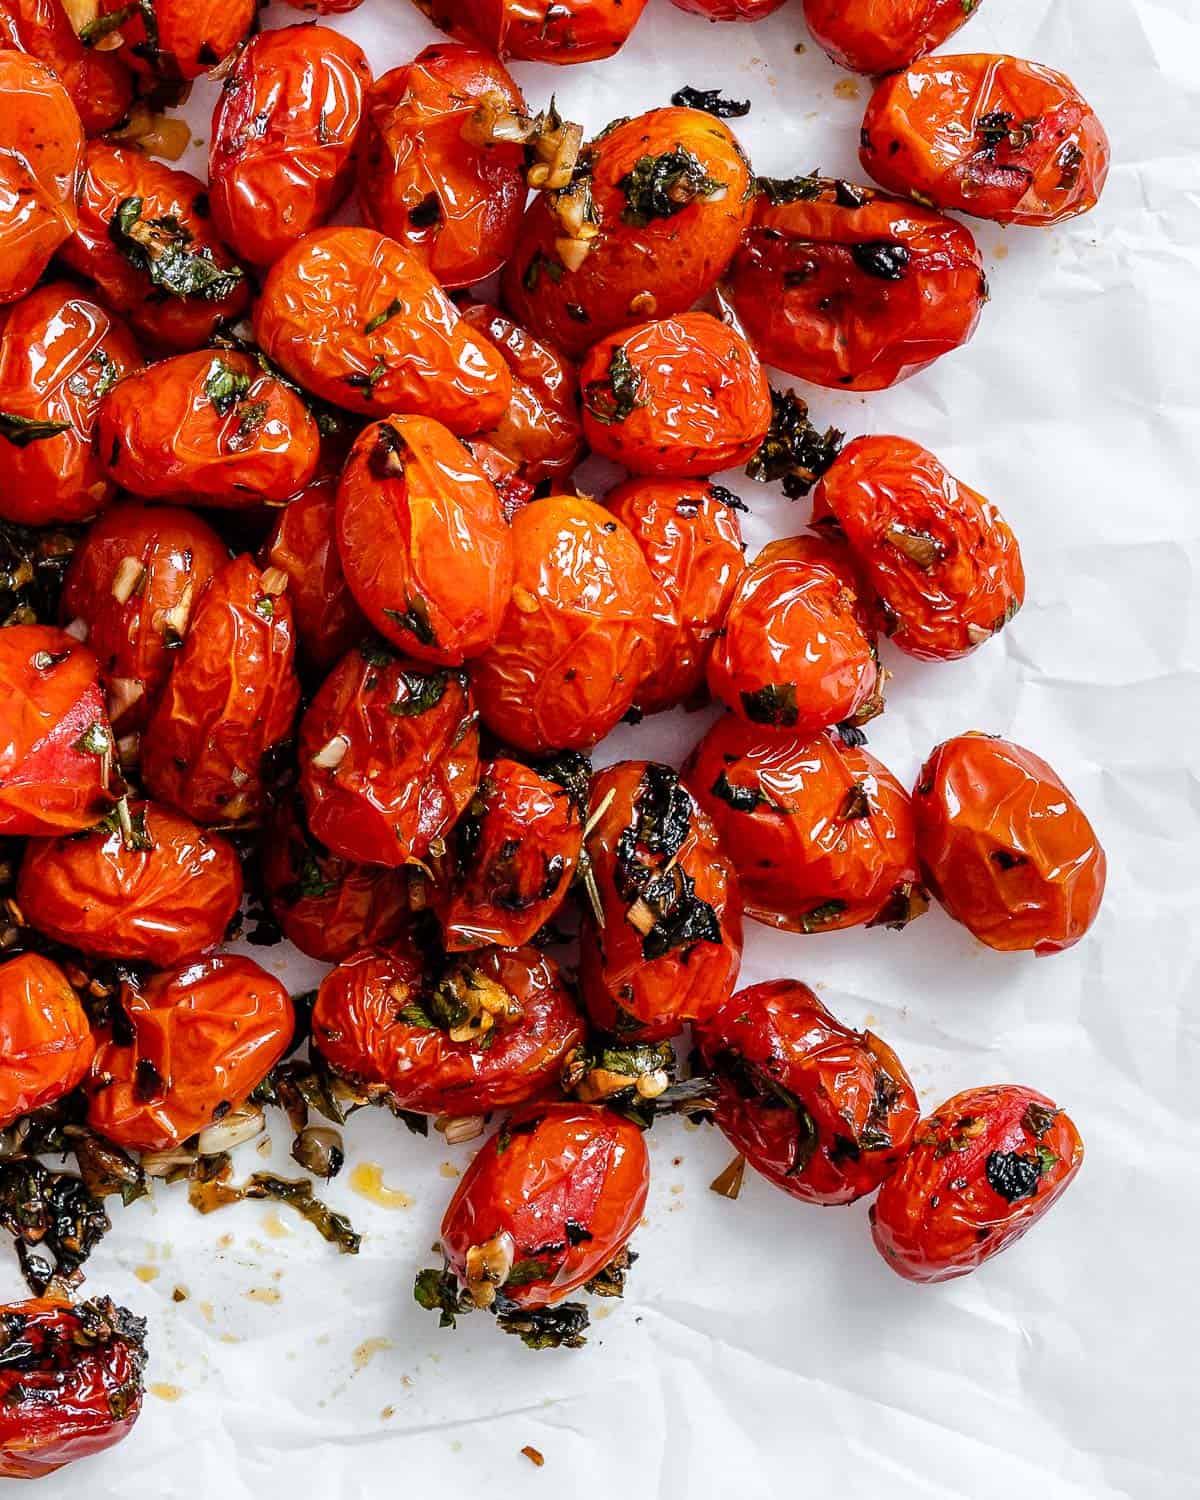 completed Easy Roasted Cherry Tomatoes against a white surface